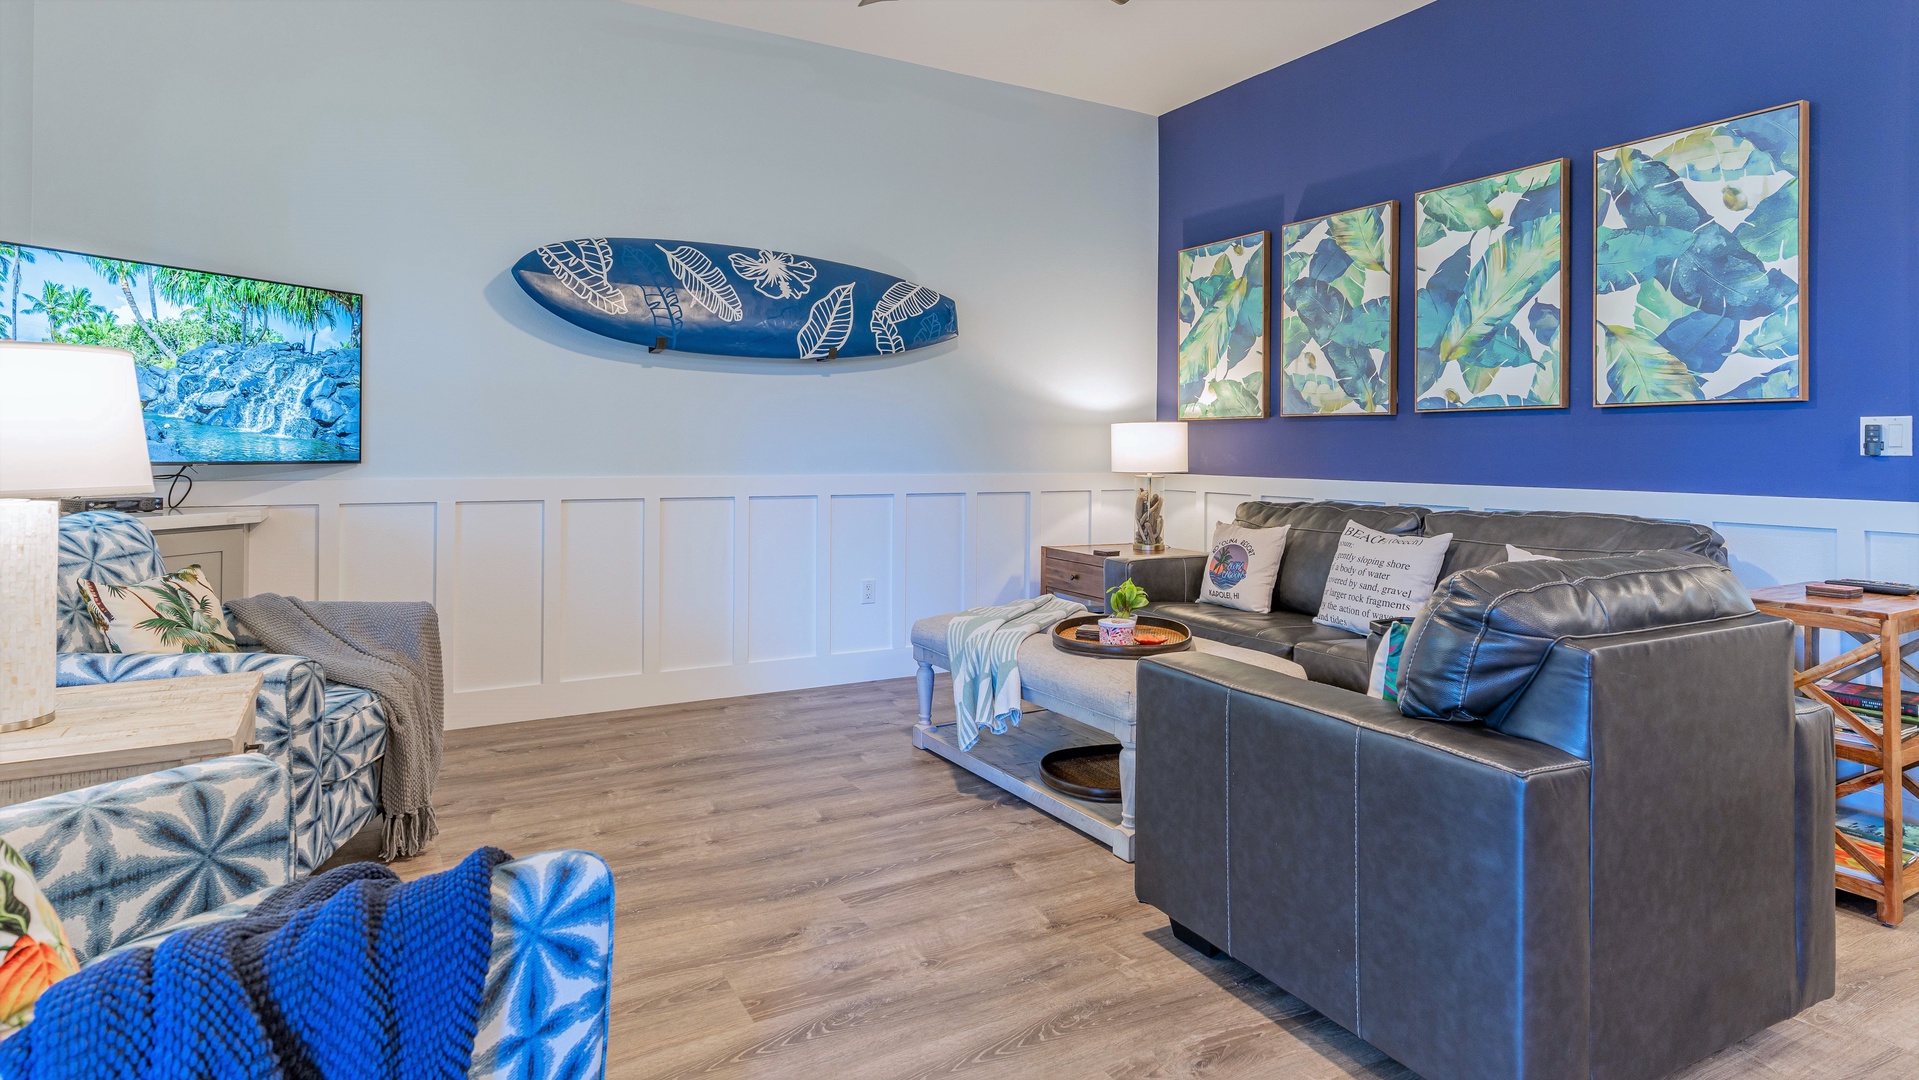 Kapolei Vacation Rentals, Coconut Plantation 1214-2 Aloha Lagoons - The ocean themed decor is cheerful and tastefully appointed.